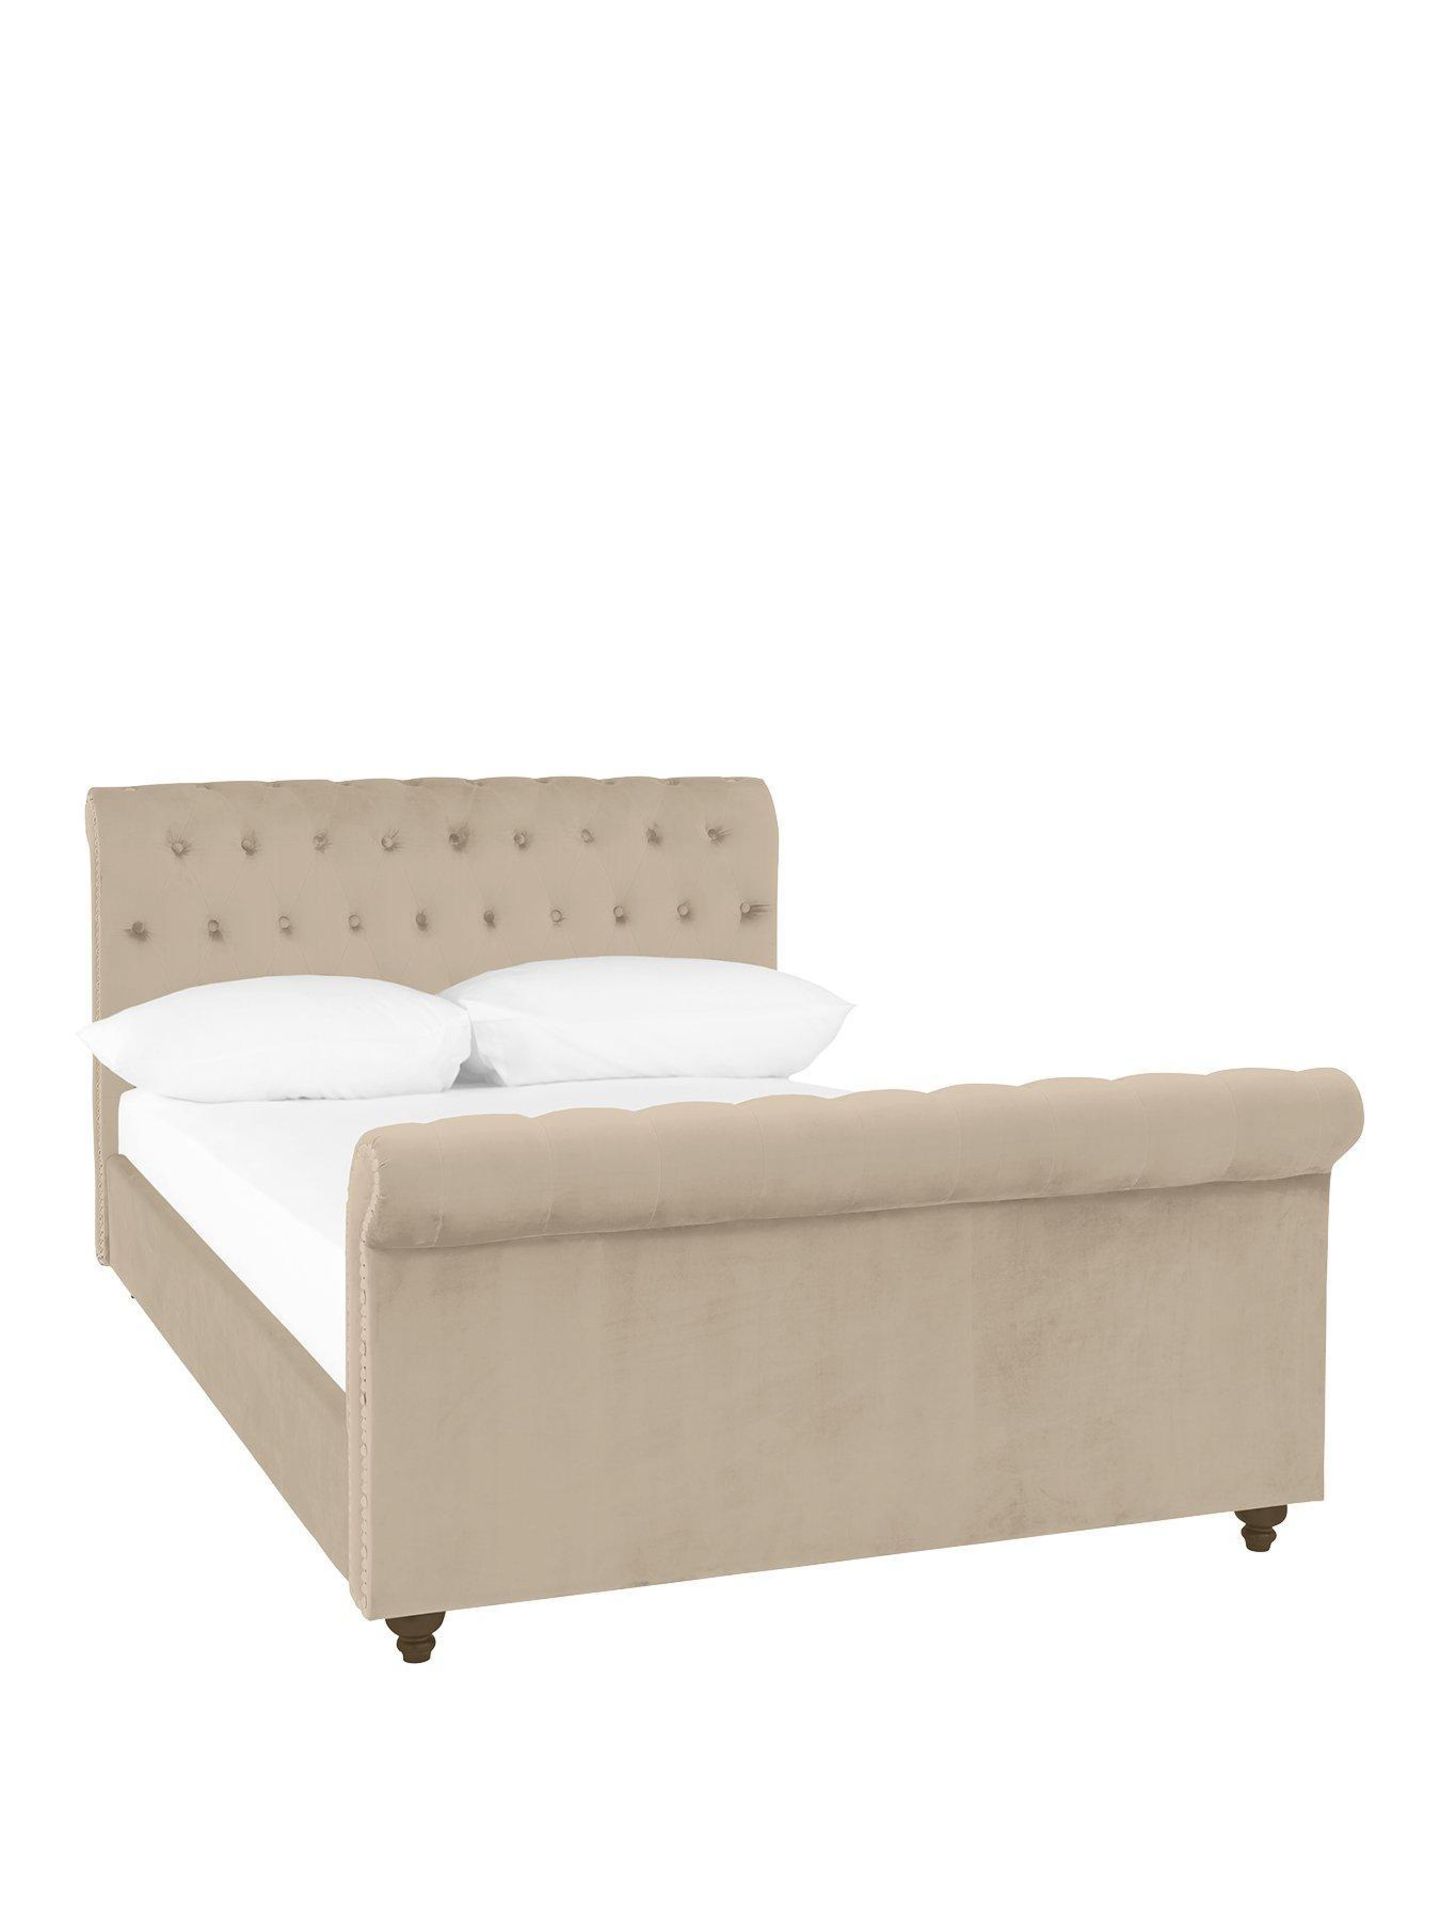 Boxed Item Eva King Scroll Bed [Champagne] 0X0X0Cm Rrp:£934.0